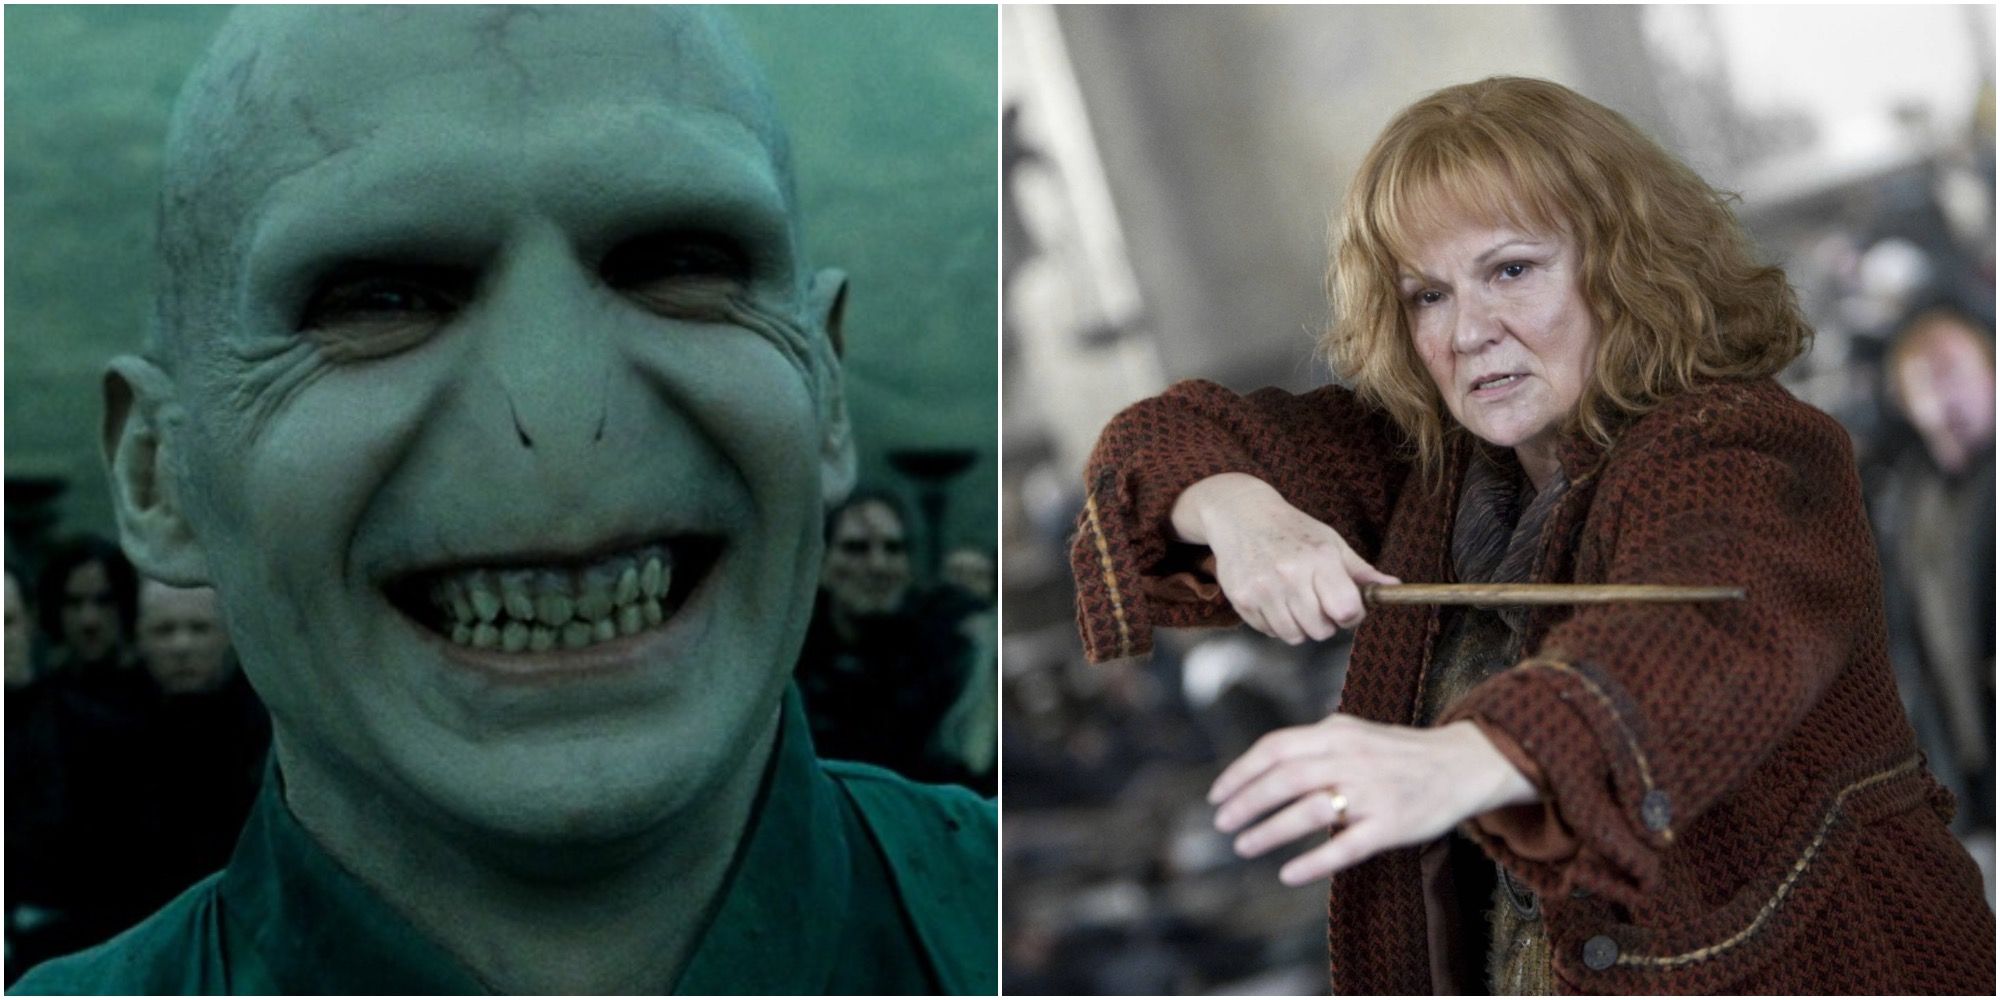 Collage of Lord Voldemort and Molly Weasley In Harry Potter and The Deathly Hallows